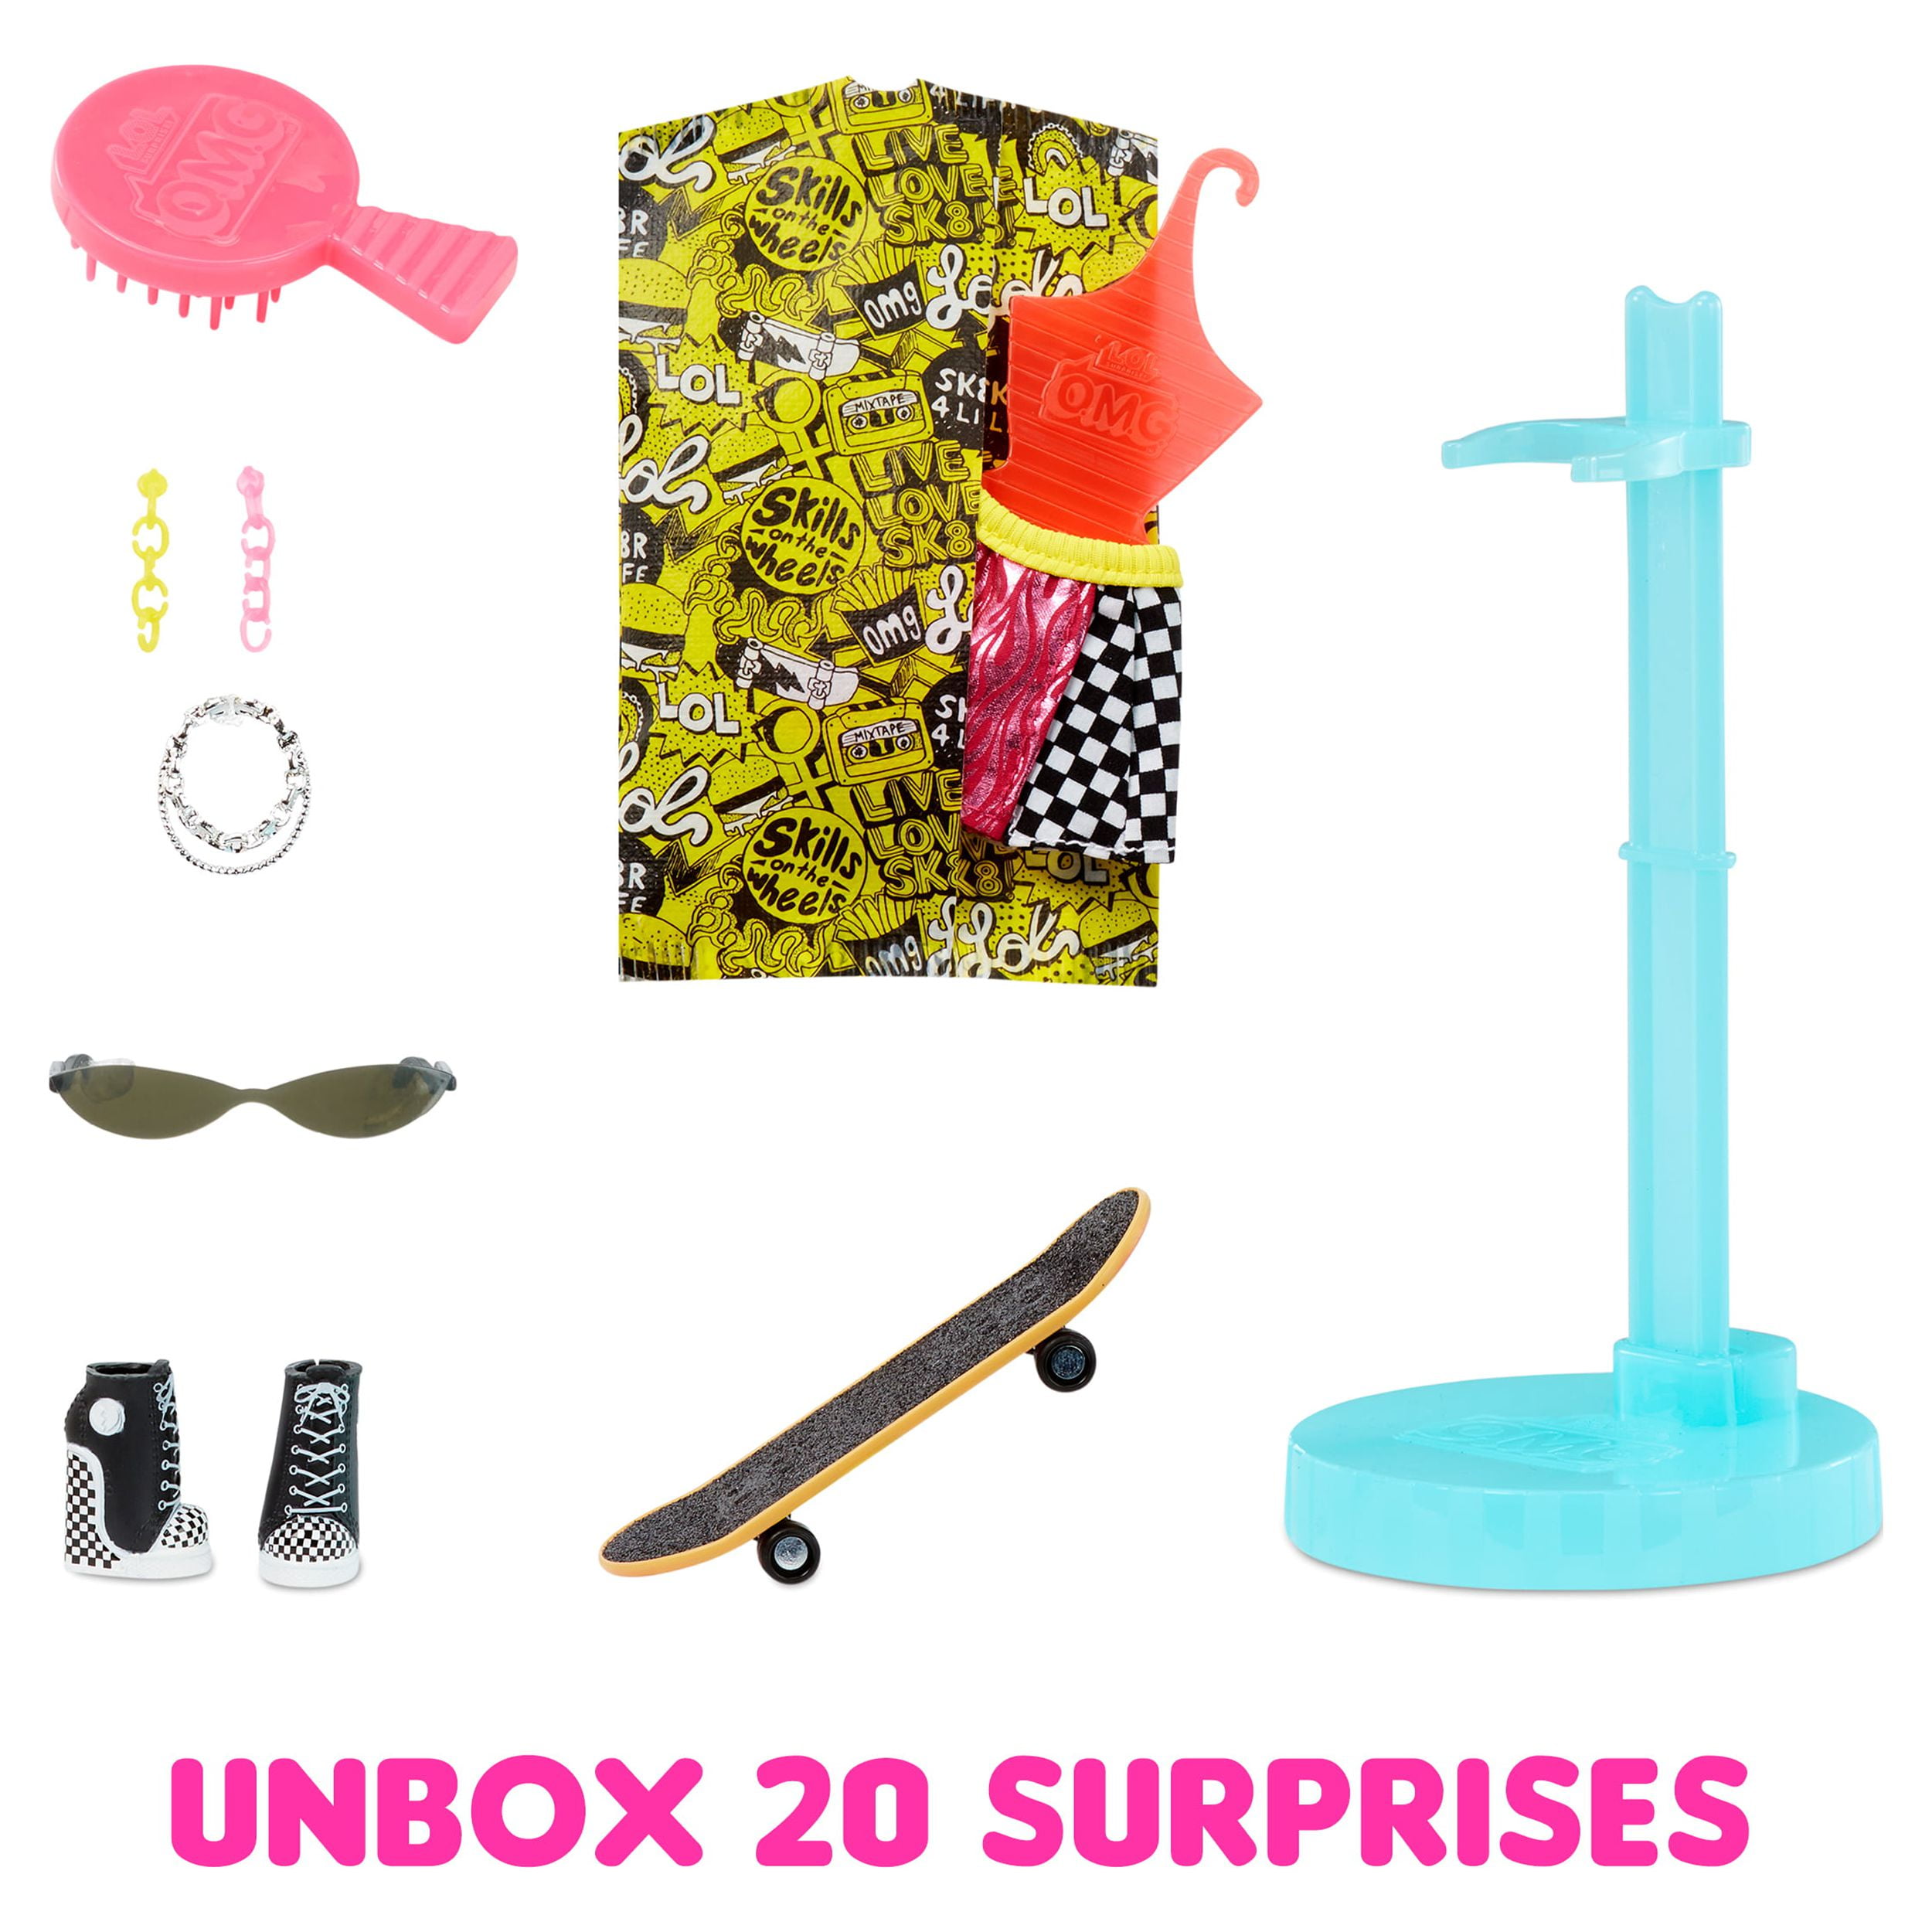 LOL Surprise OMG Skatepark Q.T. Fashion Doll with 20 Surprises,580423 - 7  inch - OMG Skatepark Q.T. Fashion Doll with 20 Surprises,580423 . Buy Doll  toys in India. shop for LOL Surprise products in India.